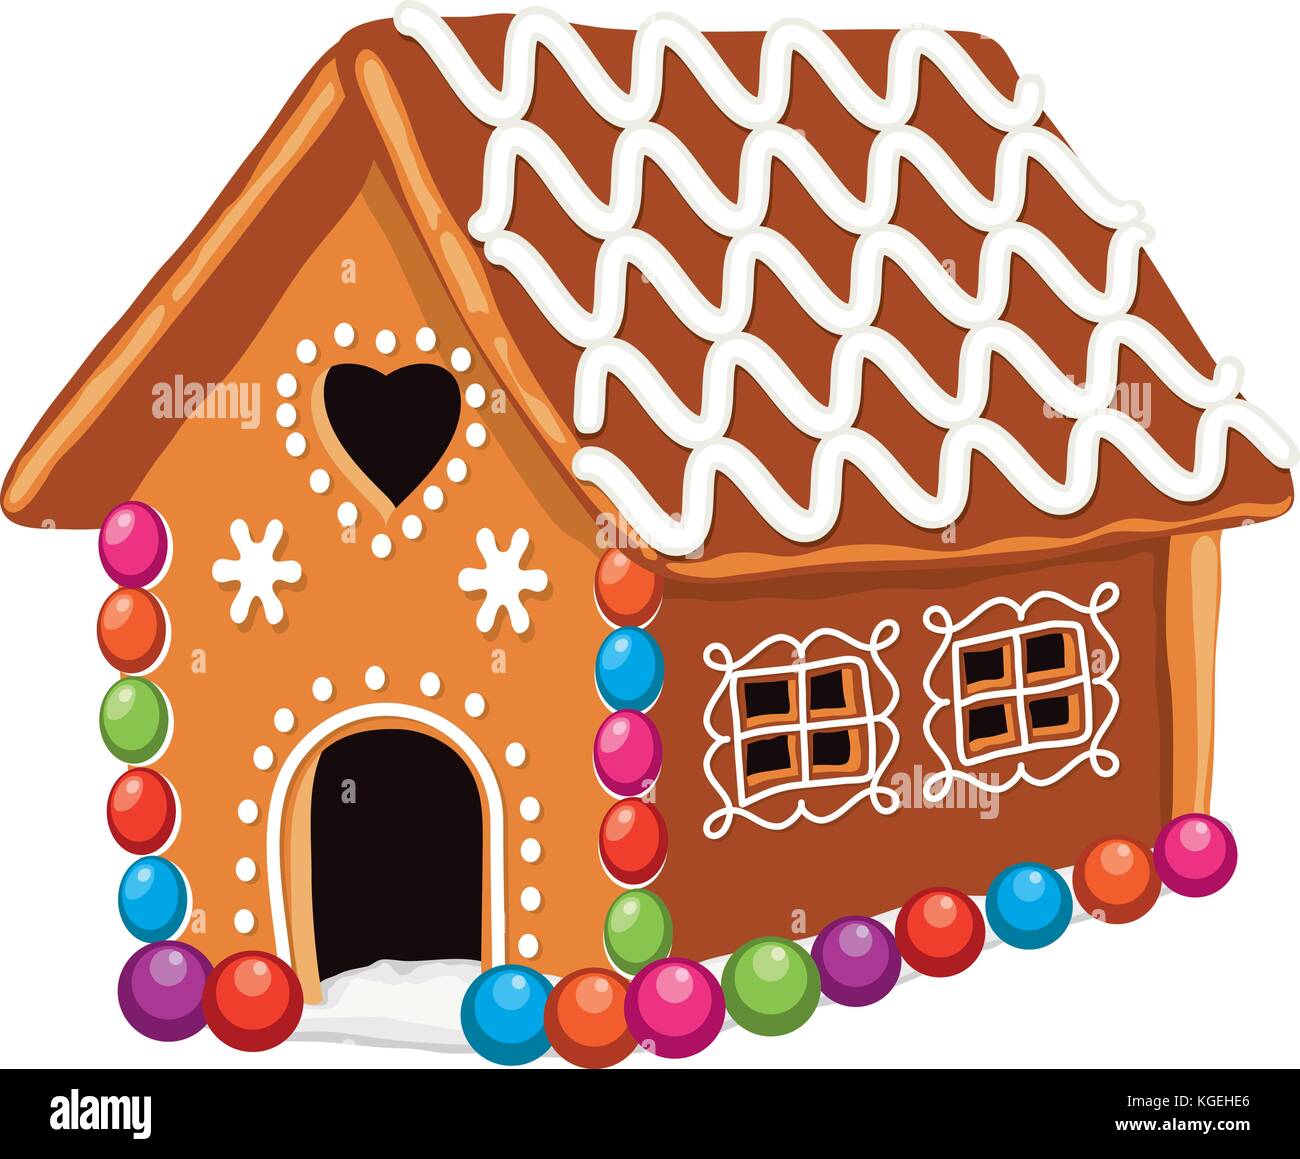 vector xmas colorful gingerbread house with sugar icing decoration. christmas holiday food background. sweet ginger bread dessert. eps10 illustration Stock Vector